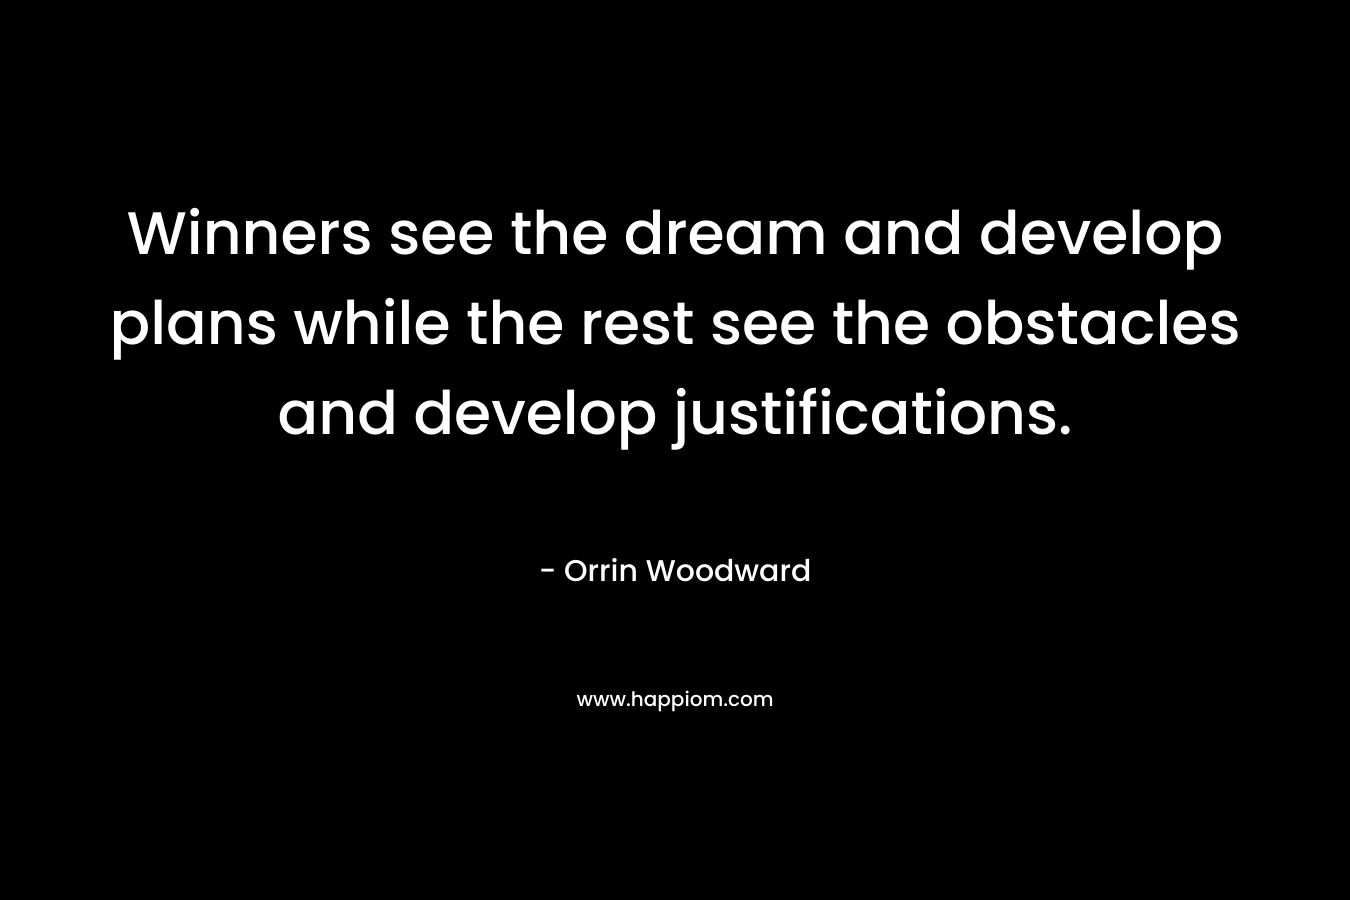 Winners see the dream and develop plans while the rest see the obstacles and develop justifications. – Orrin Woodward